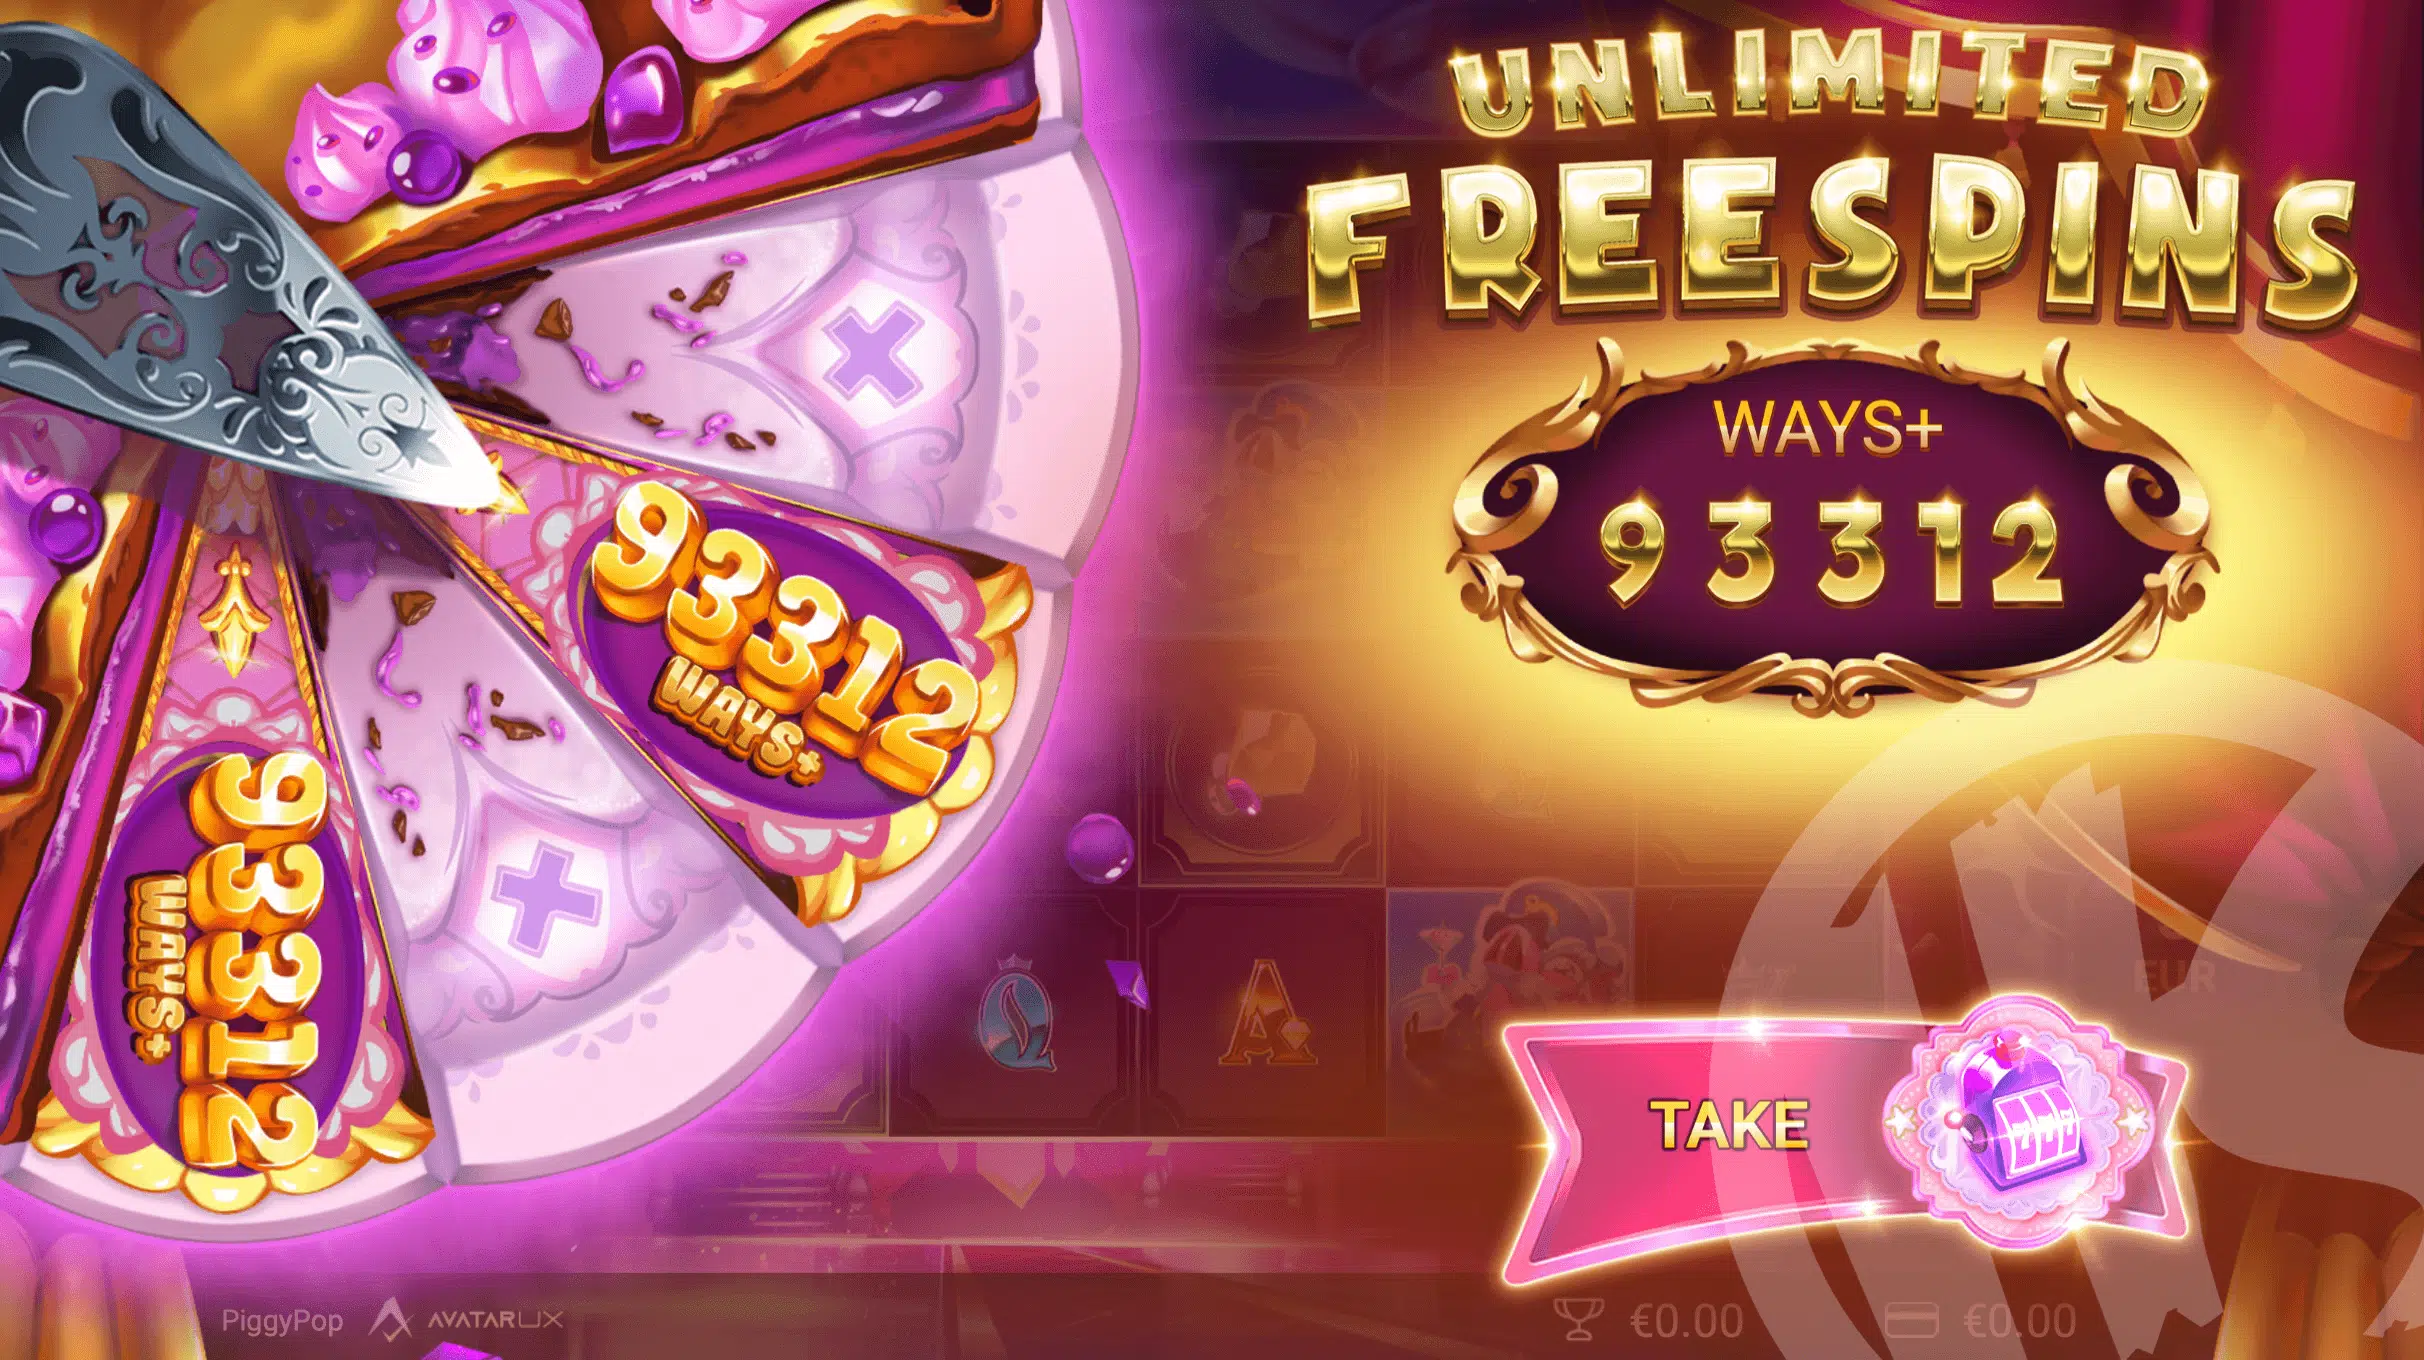 Gamble up to 93,312 Minimum Ways During Unlimited Free Spins